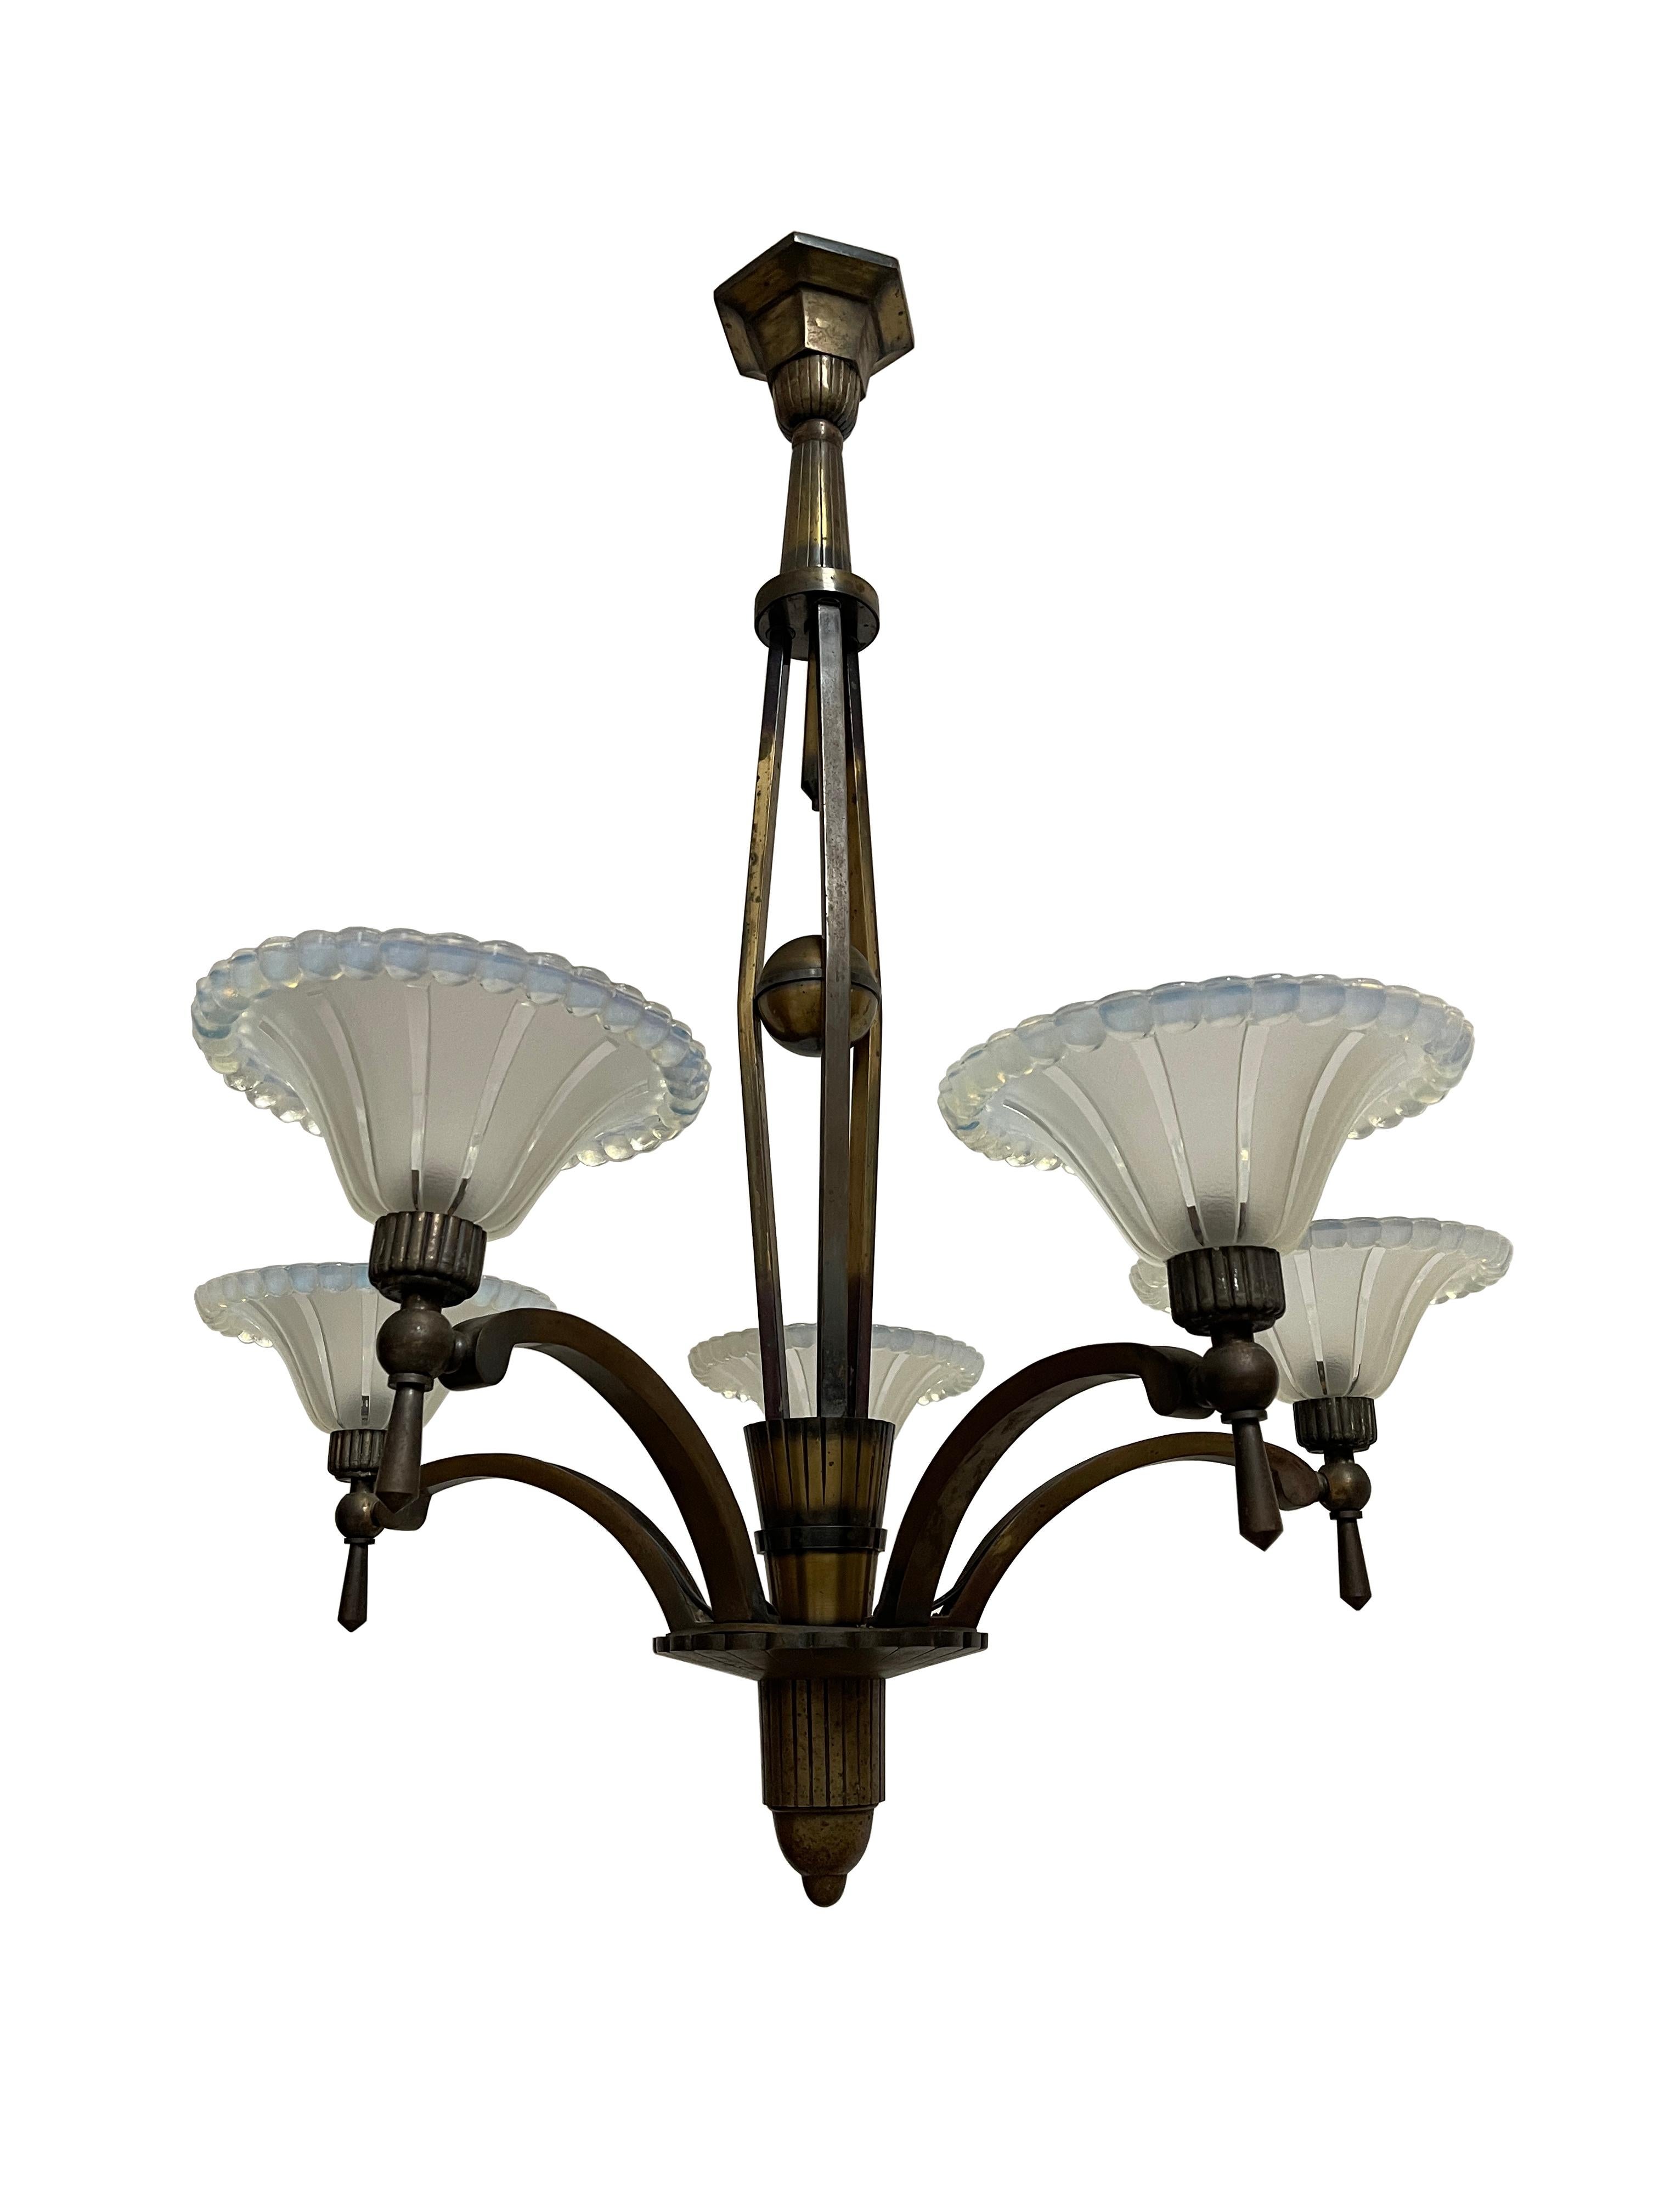 - A large French Art Deco gilded bronze five-arm ceiling chandelier featuring high-quality glasswork typical of Ezan, French circa 1930.
- The fixture comprises of five arched decorative arms each with reeded sconces encompassing Ezan frosted and